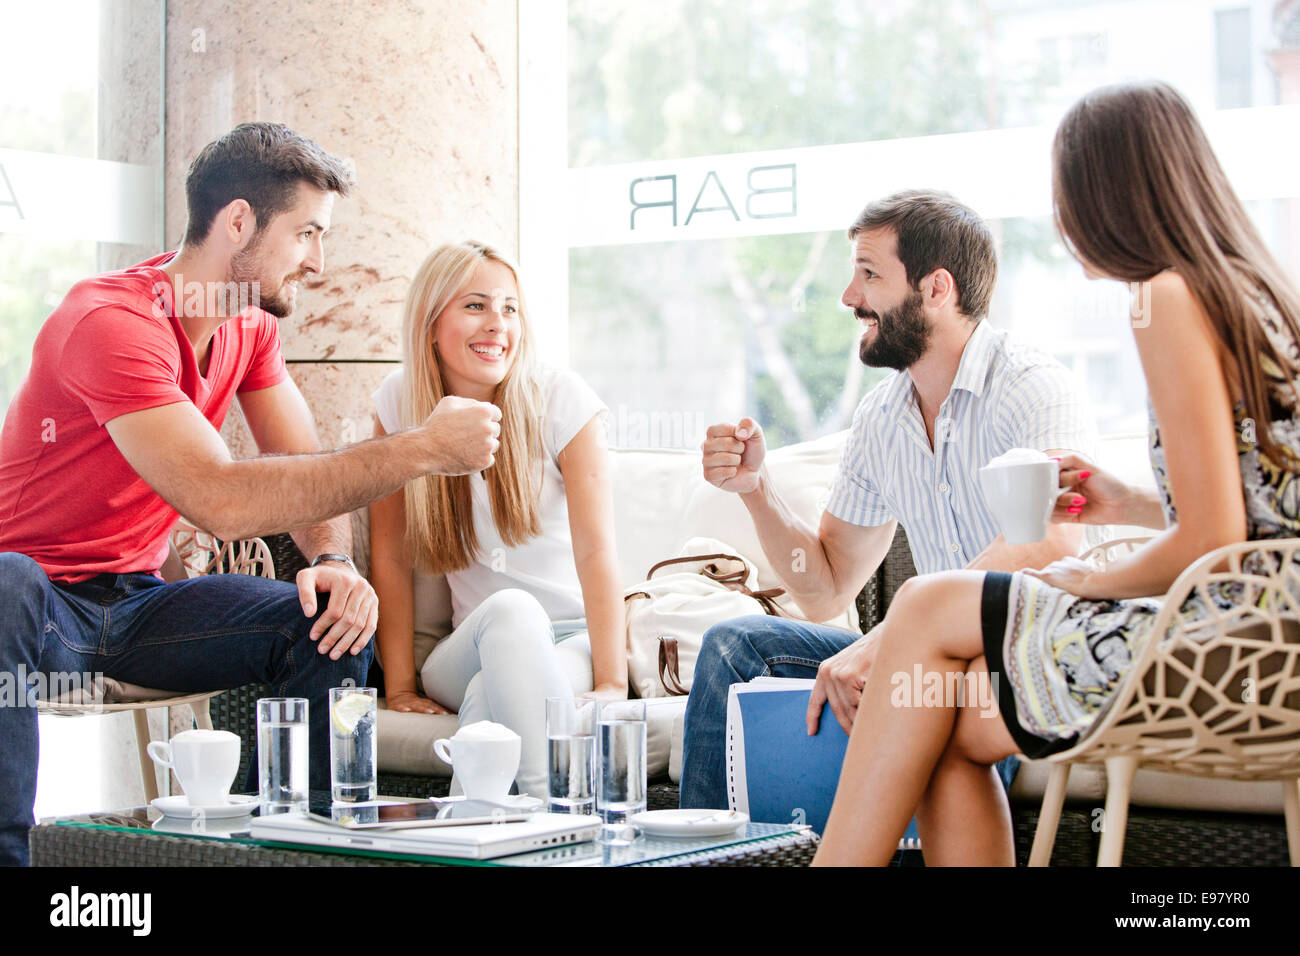 Male students in cafe preparing for fist bump, girlfriends watching Stock Photo